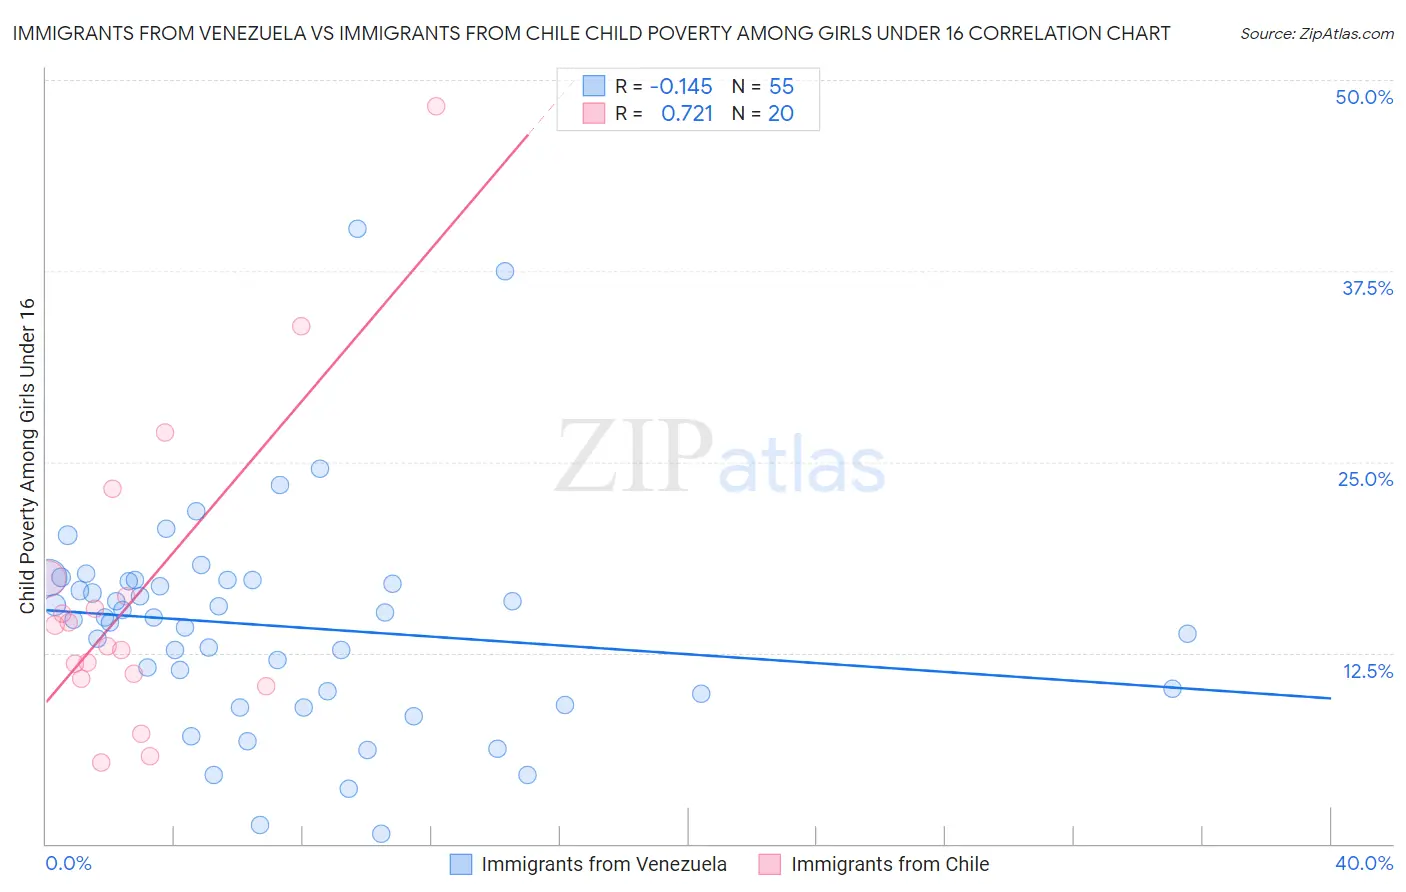 Immigrants from Venezuela vs Immigrants from Chile Child Poverty Among Girls Under 16